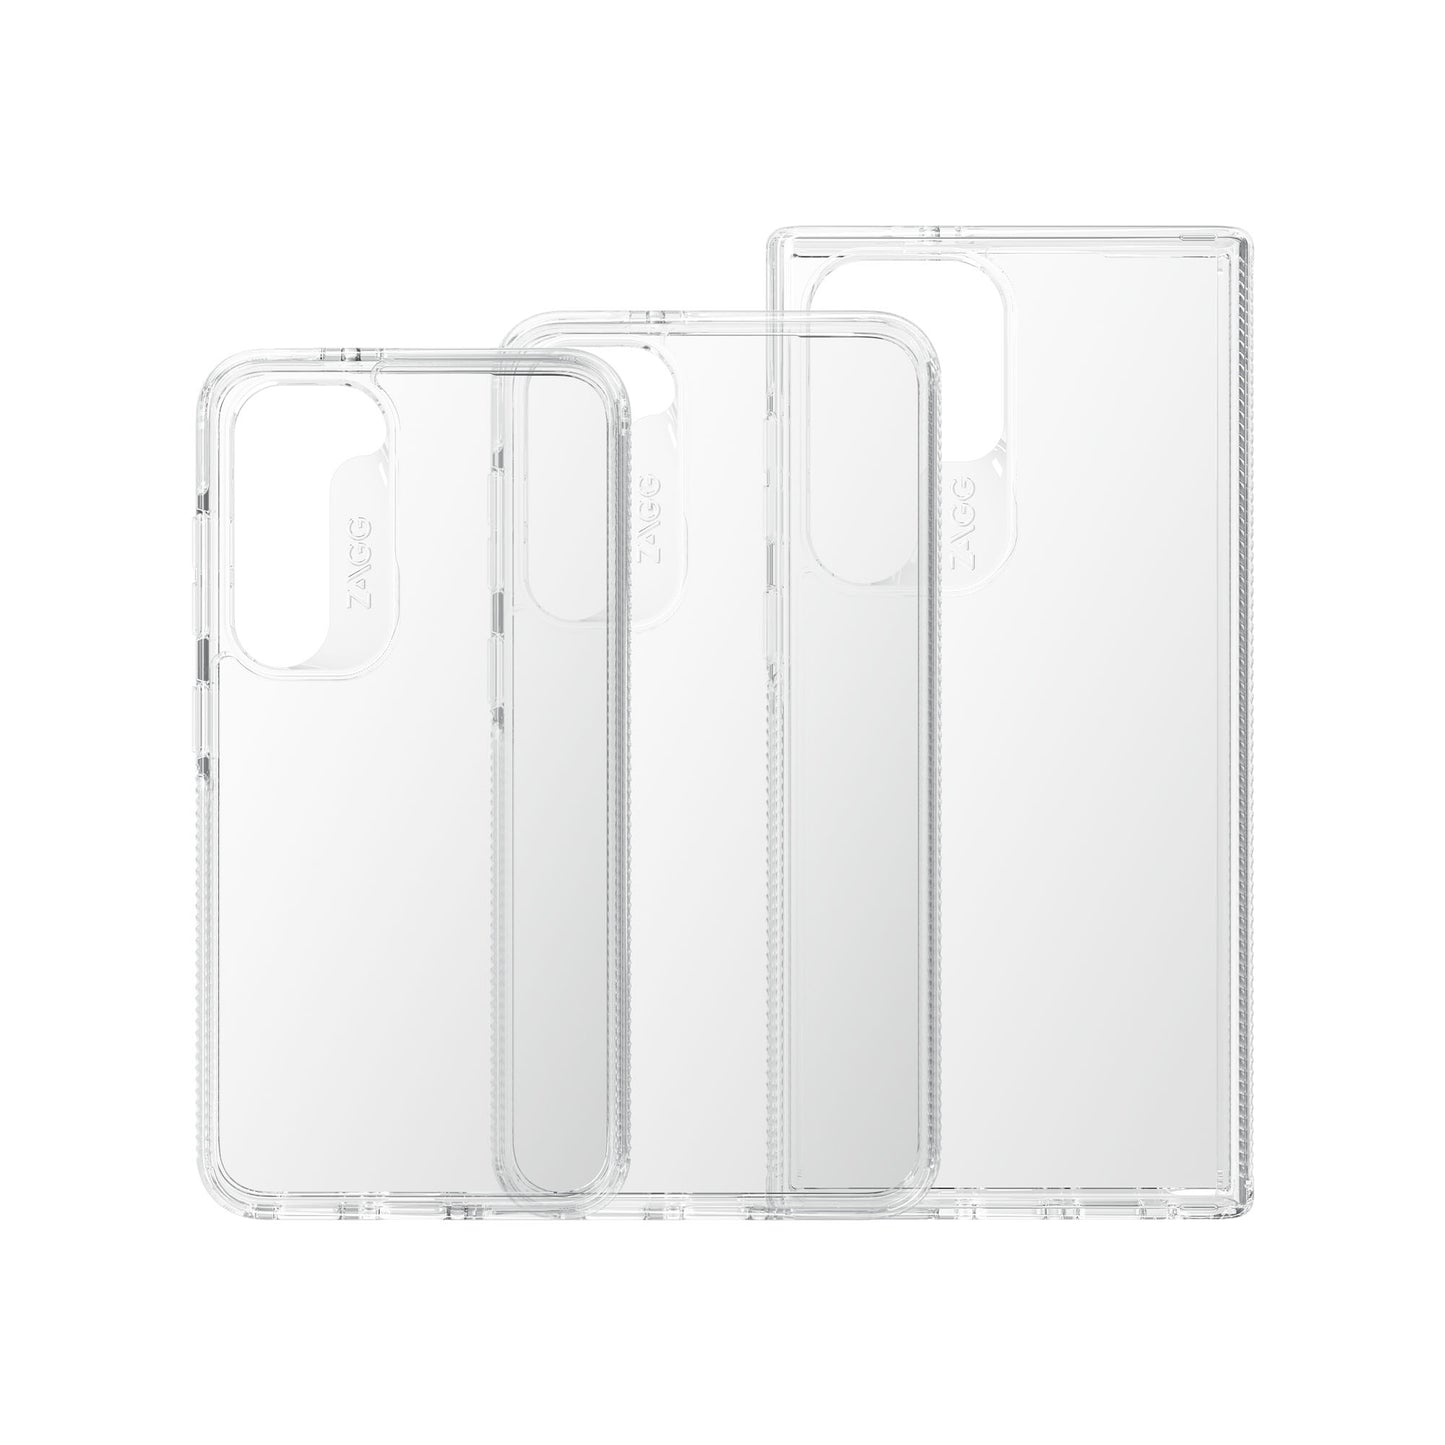 ZAGG Gear4 Crystal Palace for Samsung S23 Ultra - 2 Meters Drop Protection - Clear (Barcode: 840056177536 )